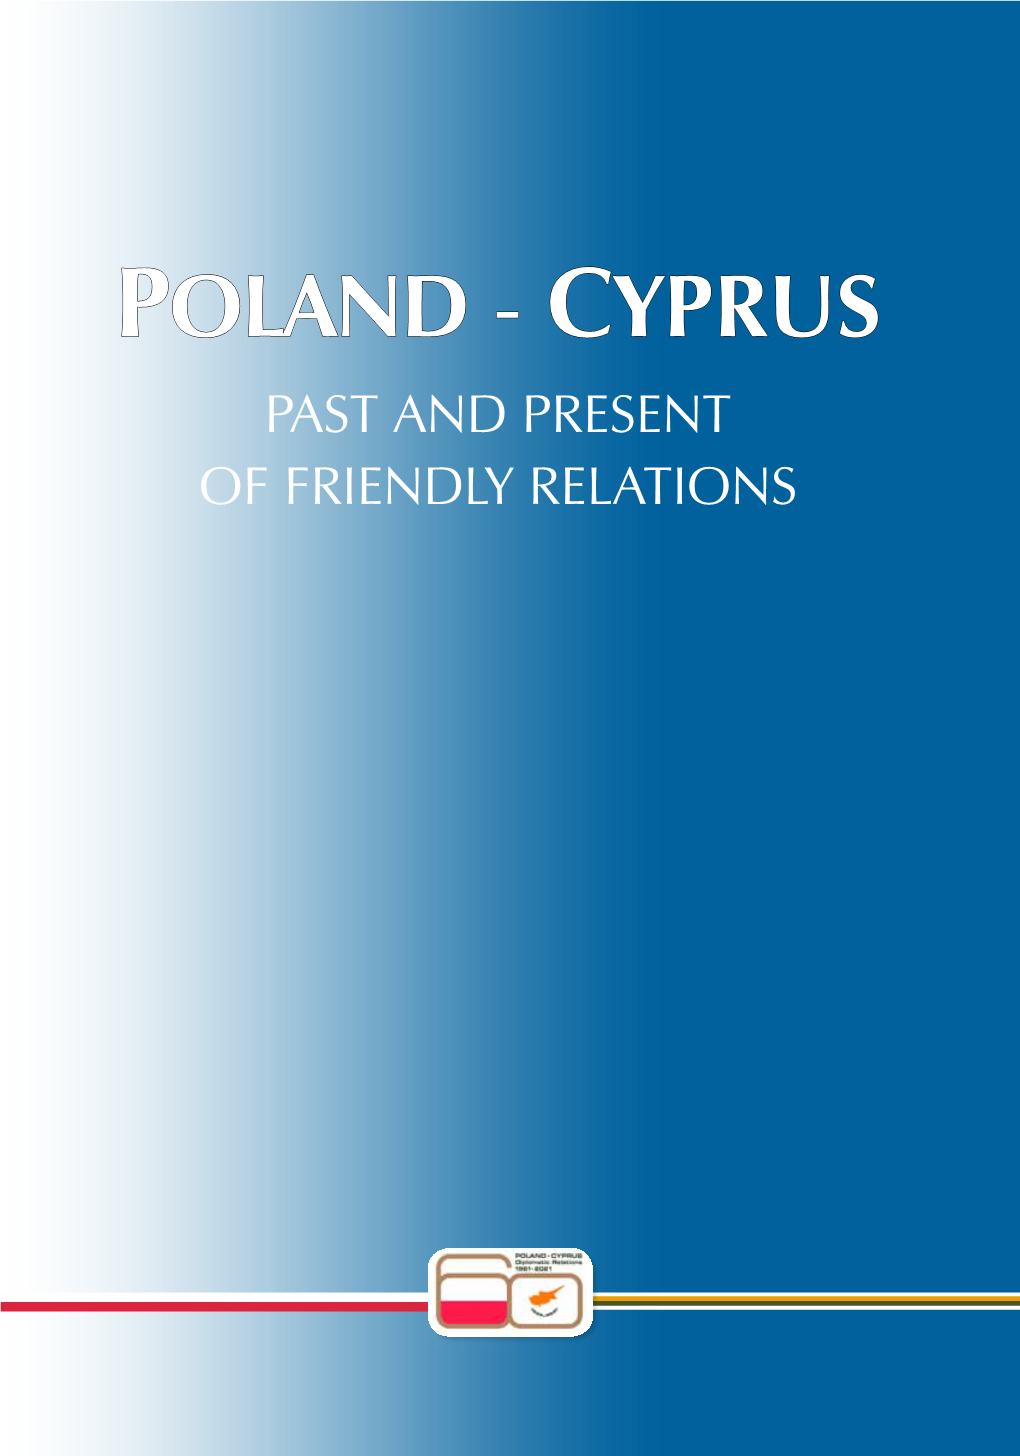 Poland and Cyprus: Past and Present of Friendly Relations